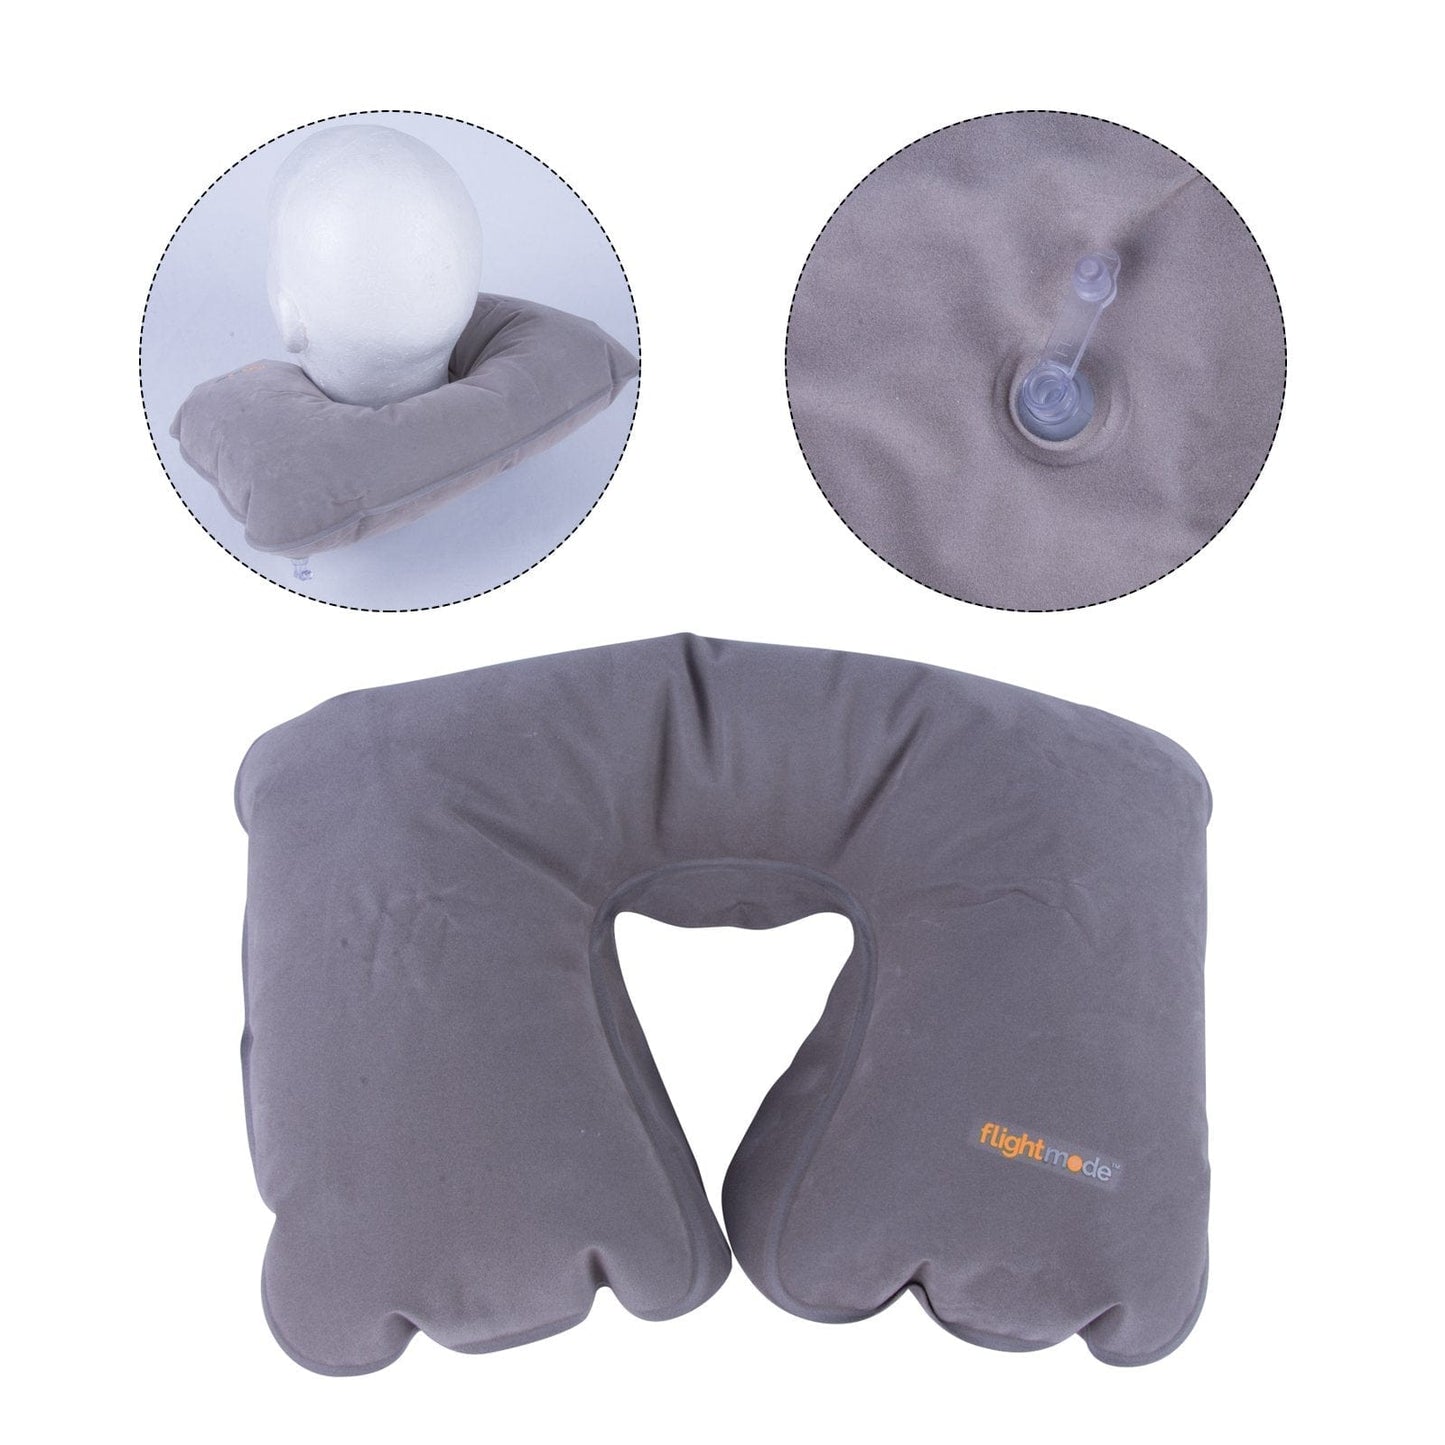 Flightmode Bags and Luggage Lightweight Inflatable Travel Neck Pillow - Grey